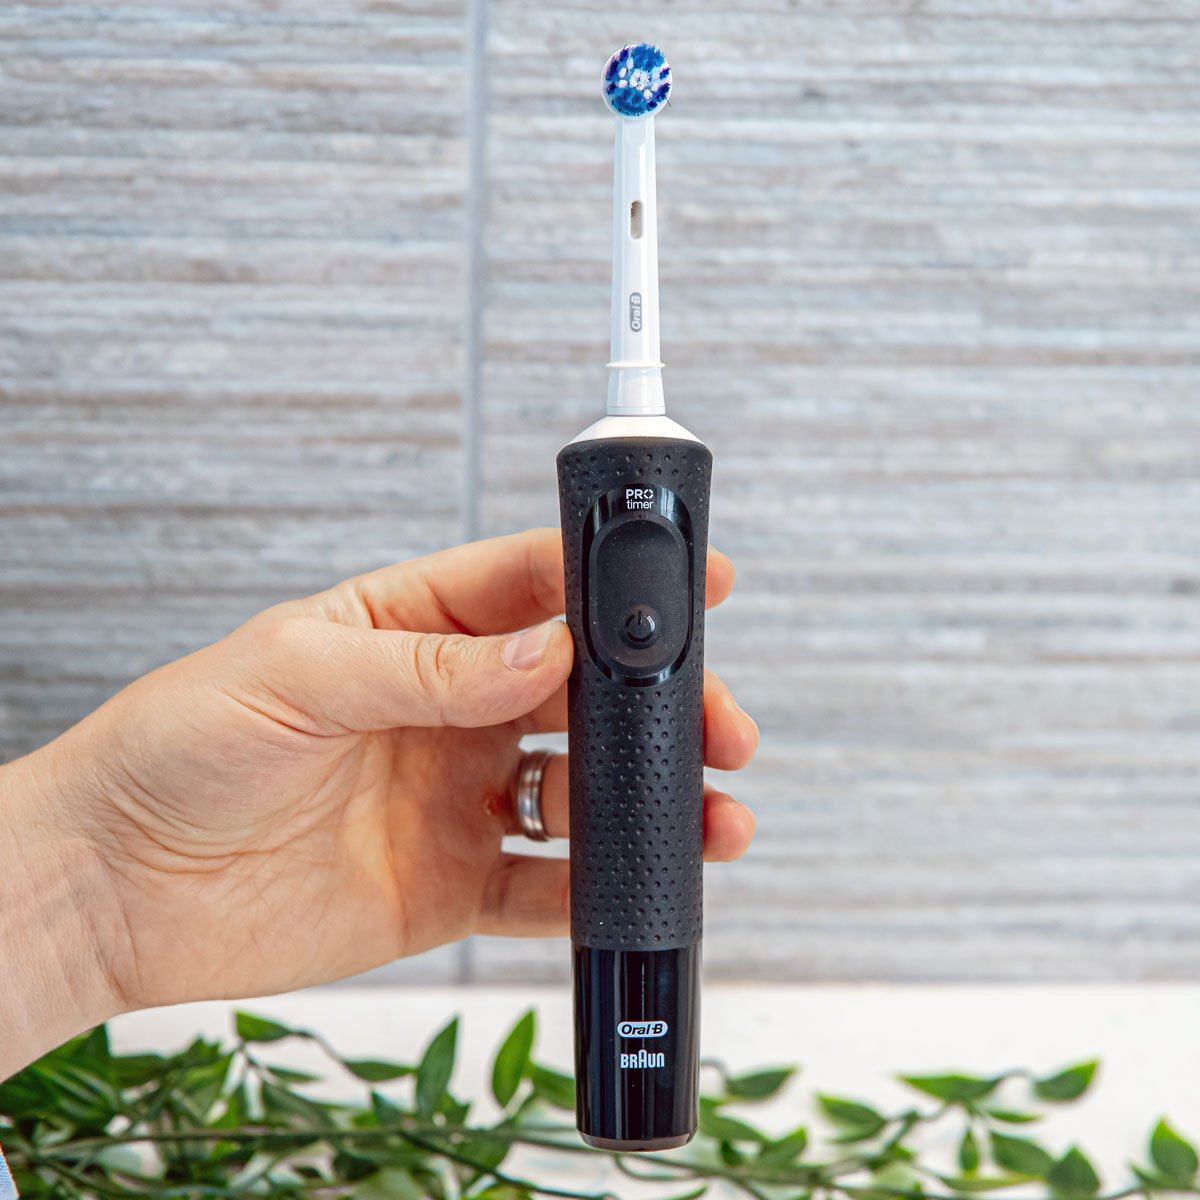 Black Oral-B Pro 500 held vertically in the hand